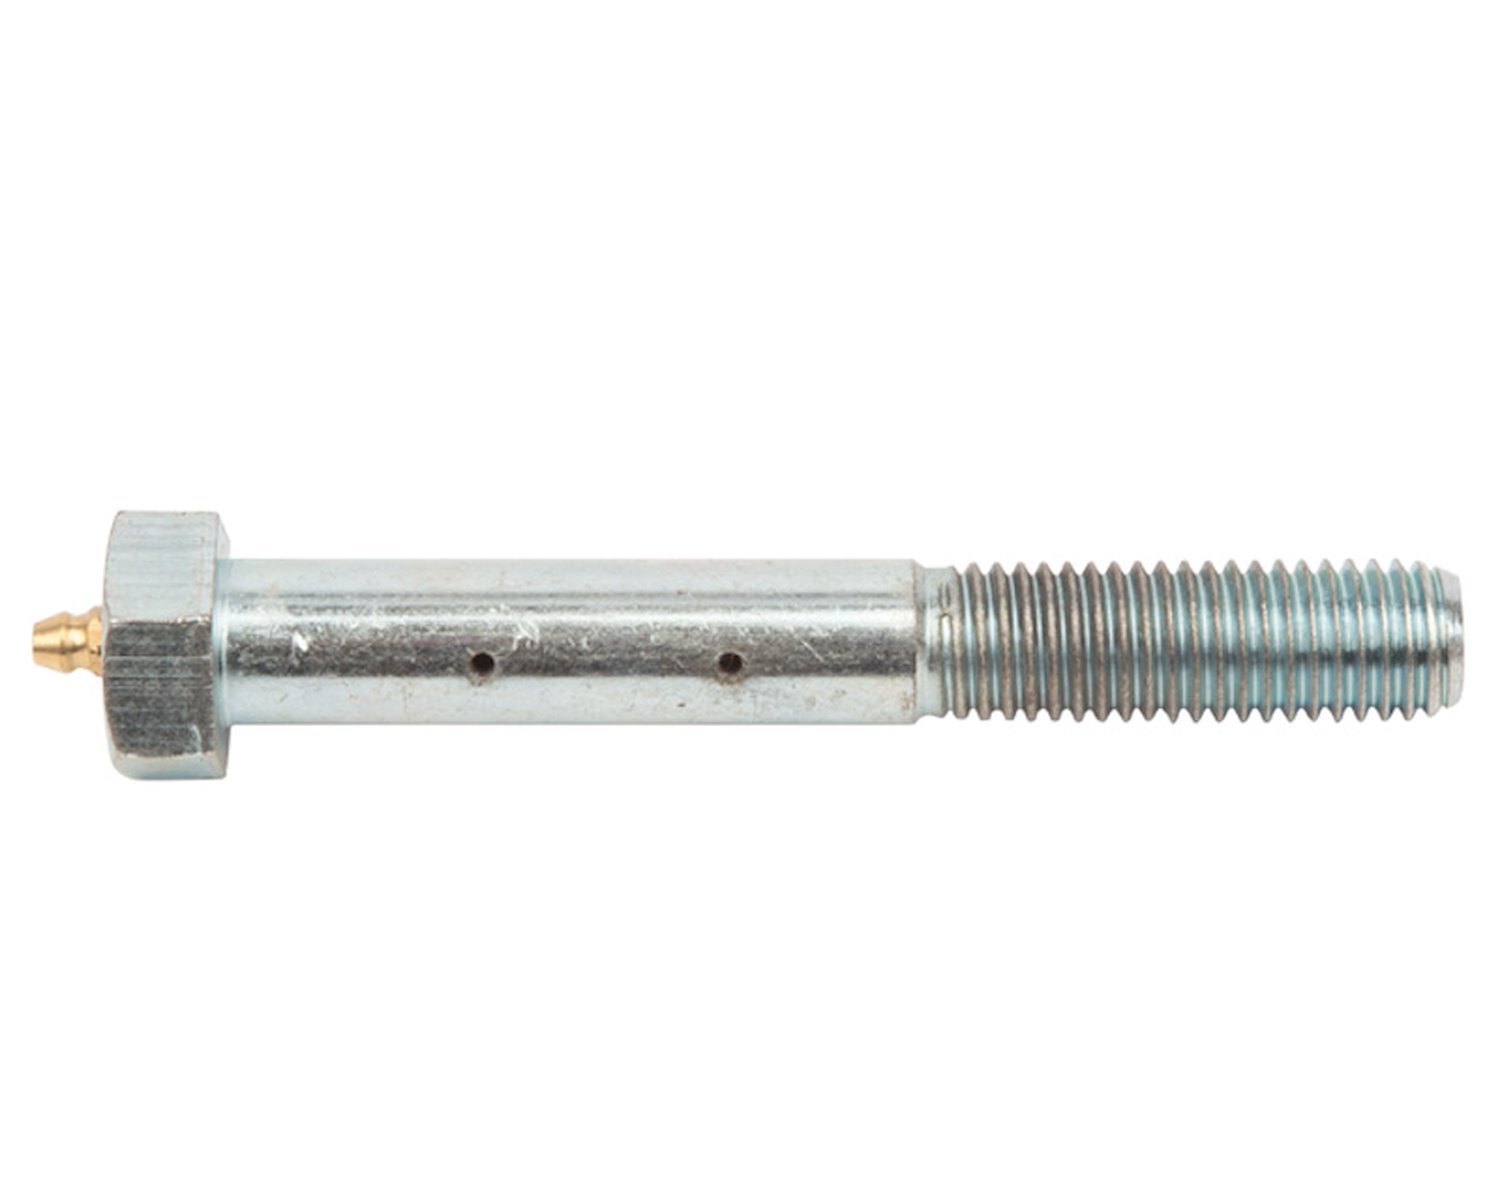 Greasable Bolt M18 x 130mm threads